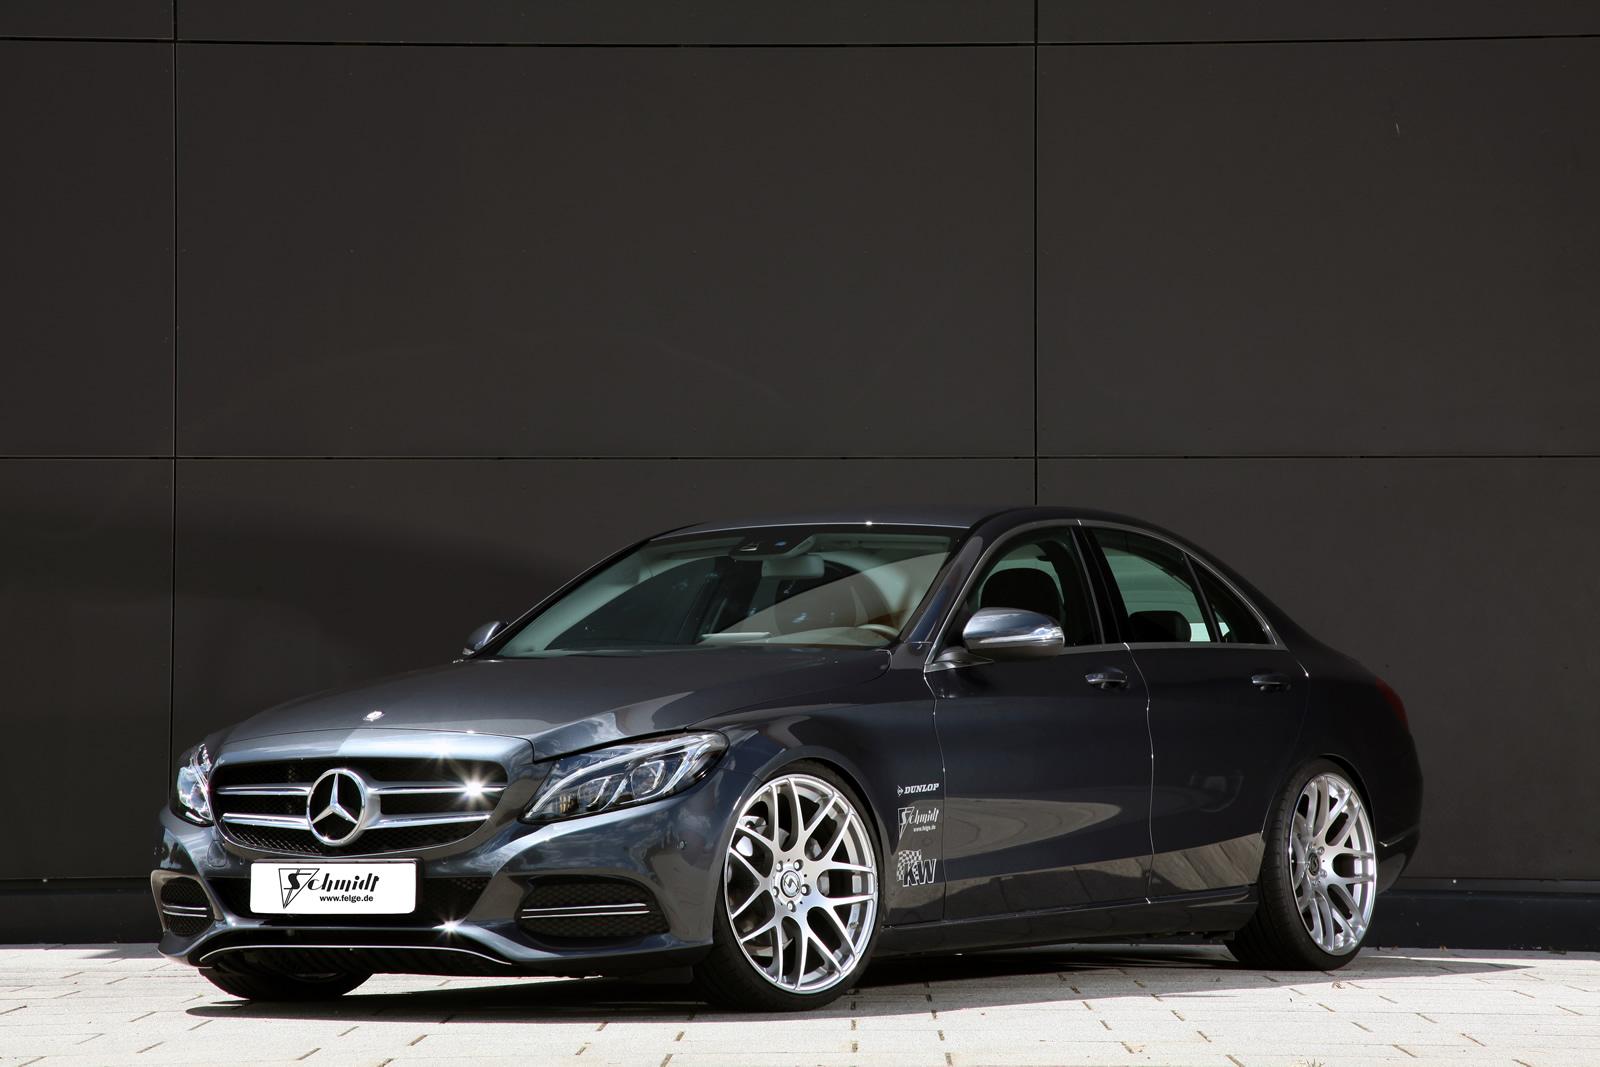 2014 Mercedes-Benz C-Class Gets Tuning Touches from Schmidt